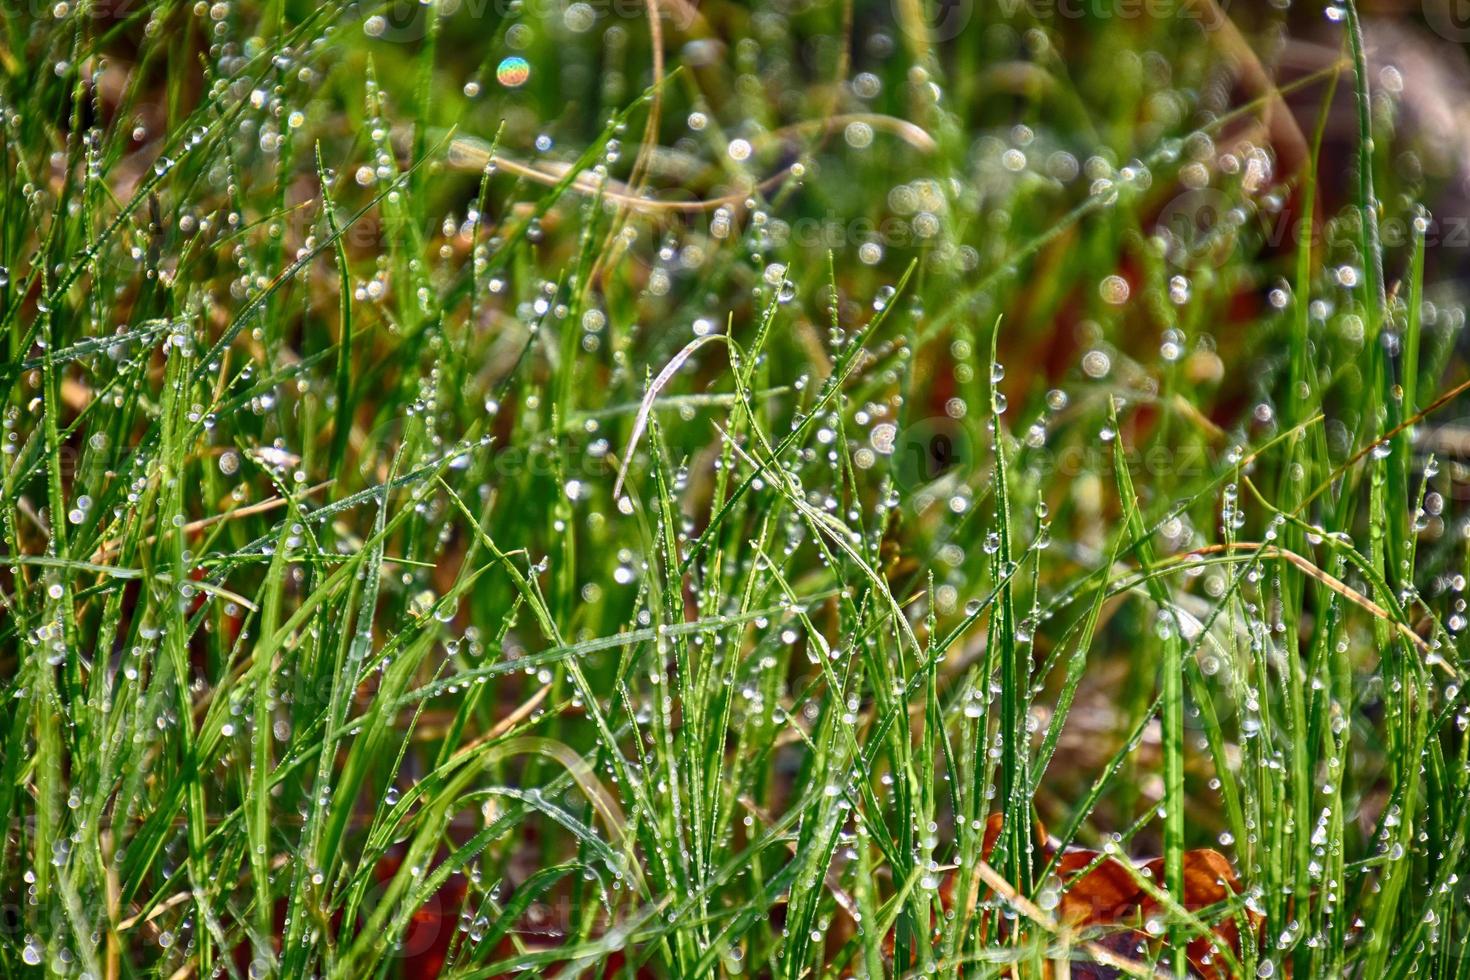 spring background with young grass blades in drops of morning dew in the warm sun photo